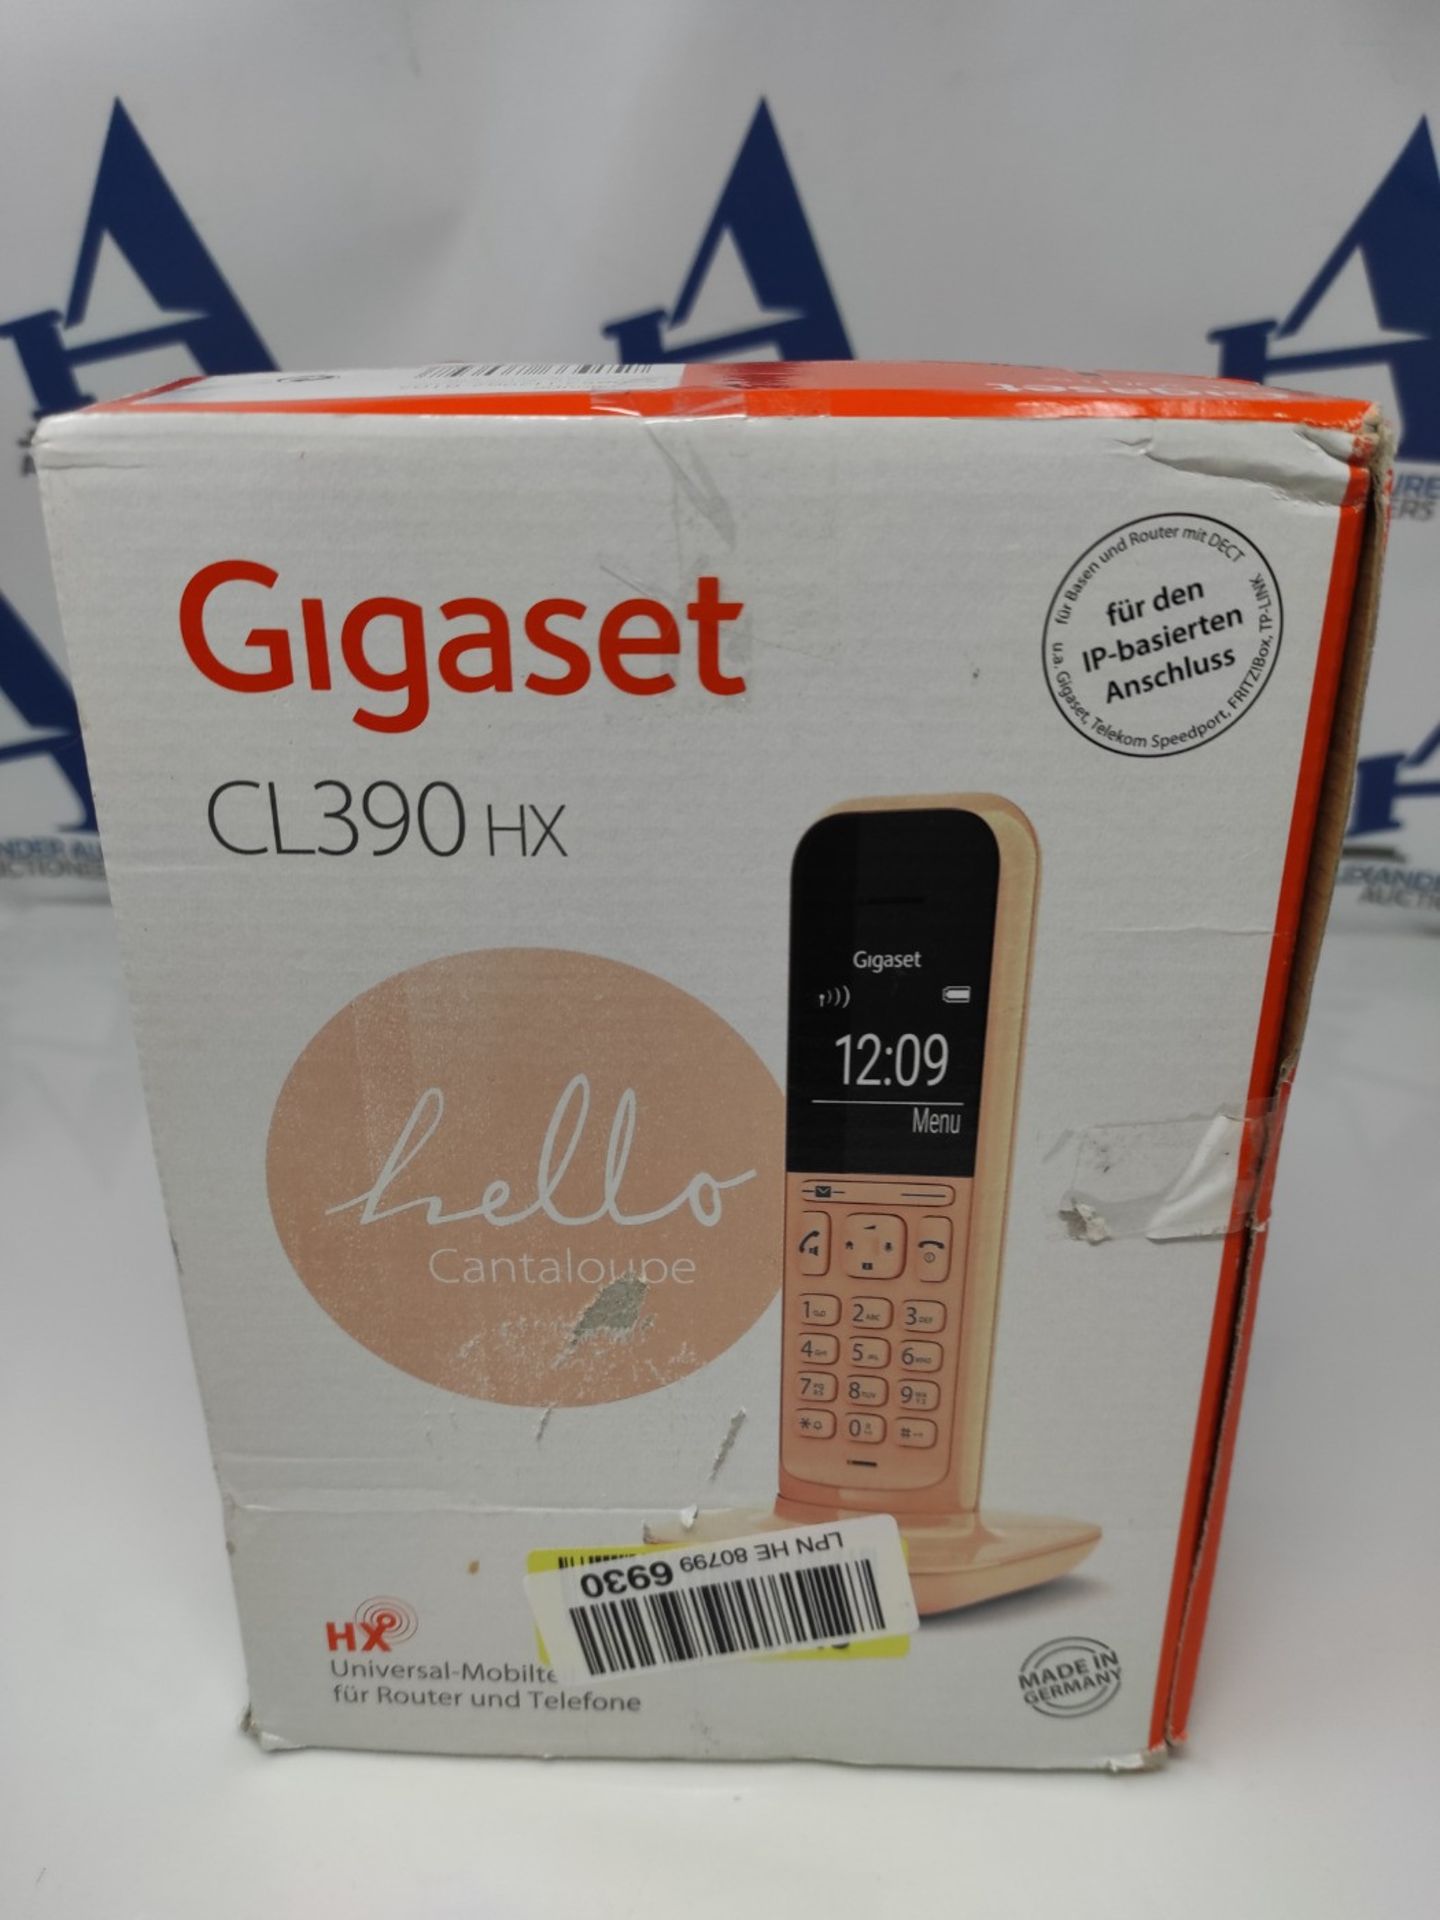 Gigaset CL390HX - Design DECT handset with charging cradle - Cordless phone for router - Image 5 of 6